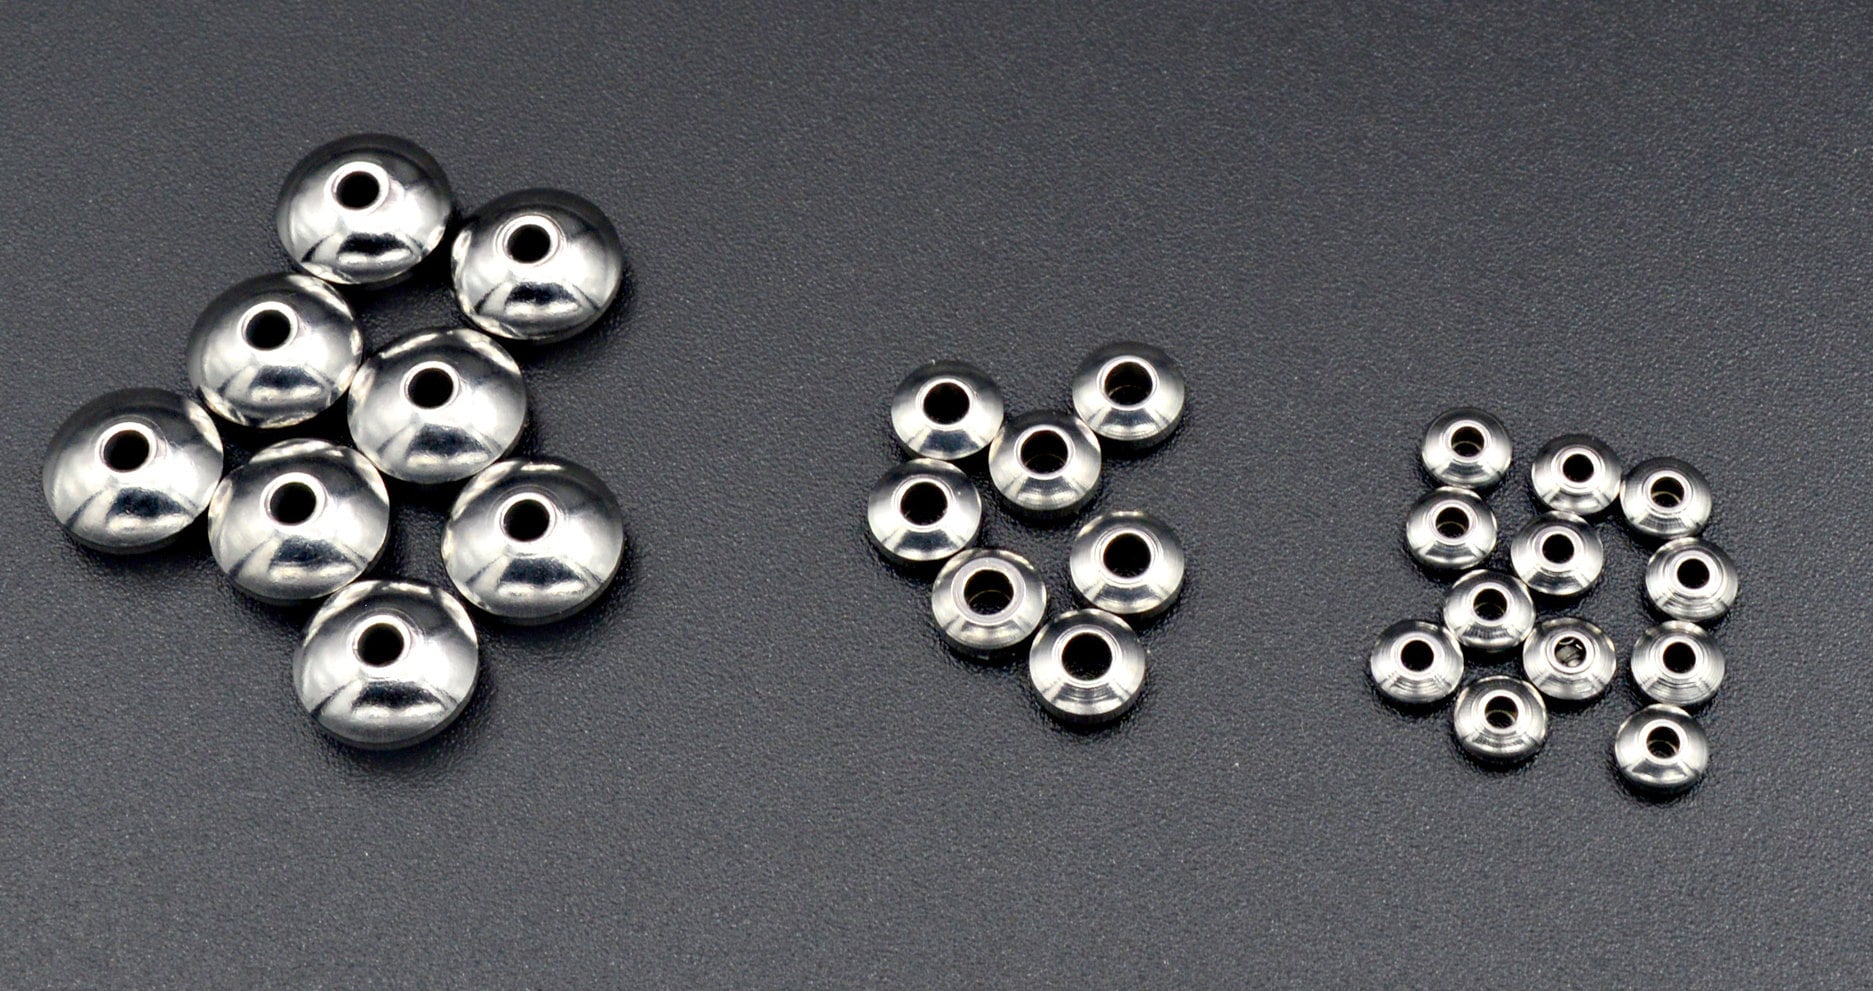 20 PCs Stainless Steel Silver Wheel Roundel Plain Spacer Beads Size 4mm, 5mm,8mm Jewelry Finding Supply For Jewelry Making